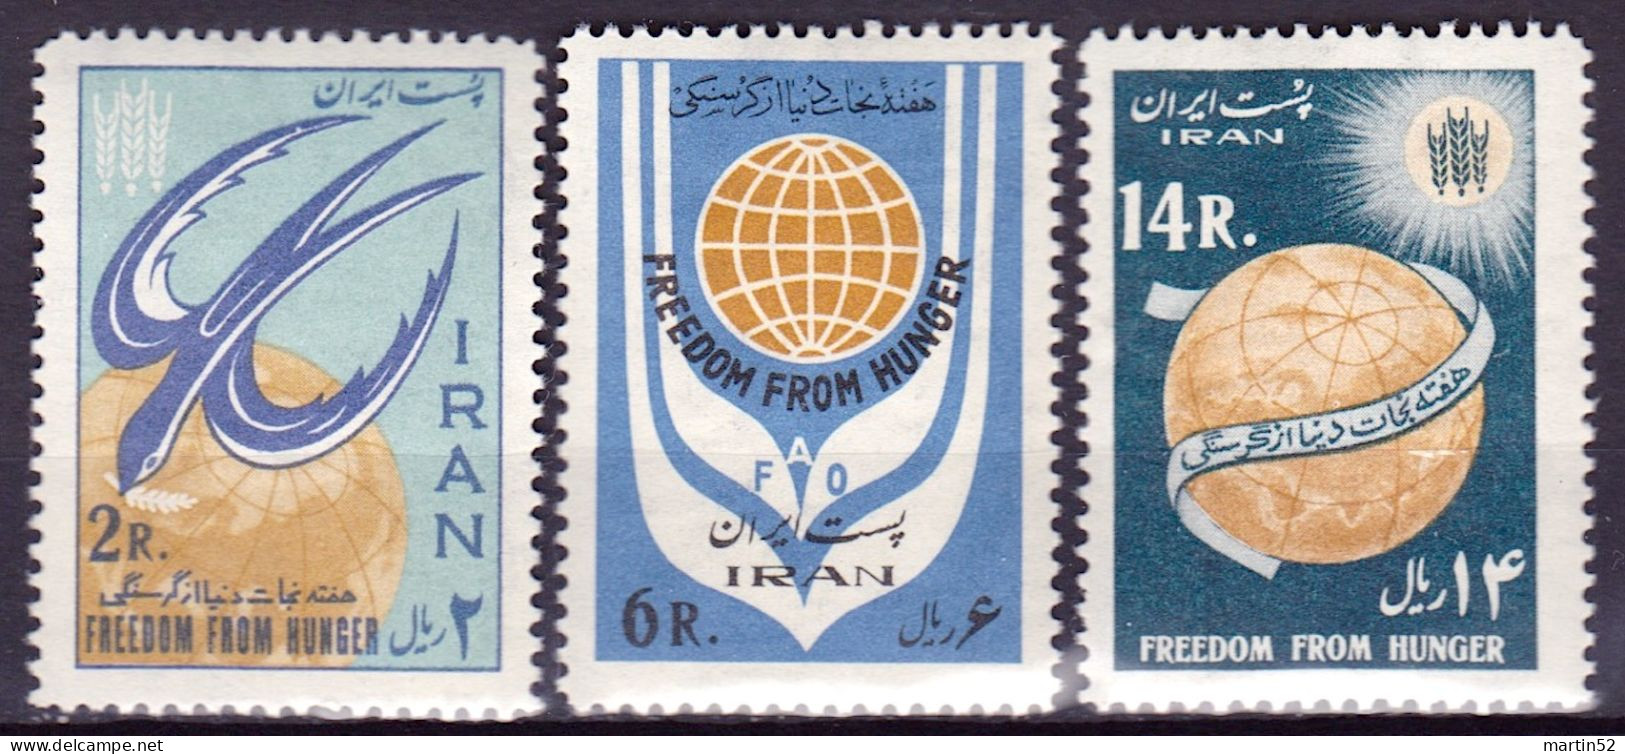 IRAN 1963: FREEDOM FROM HUNGER Michel-N° 1153-1155  ** MNH - Contra El Hambre